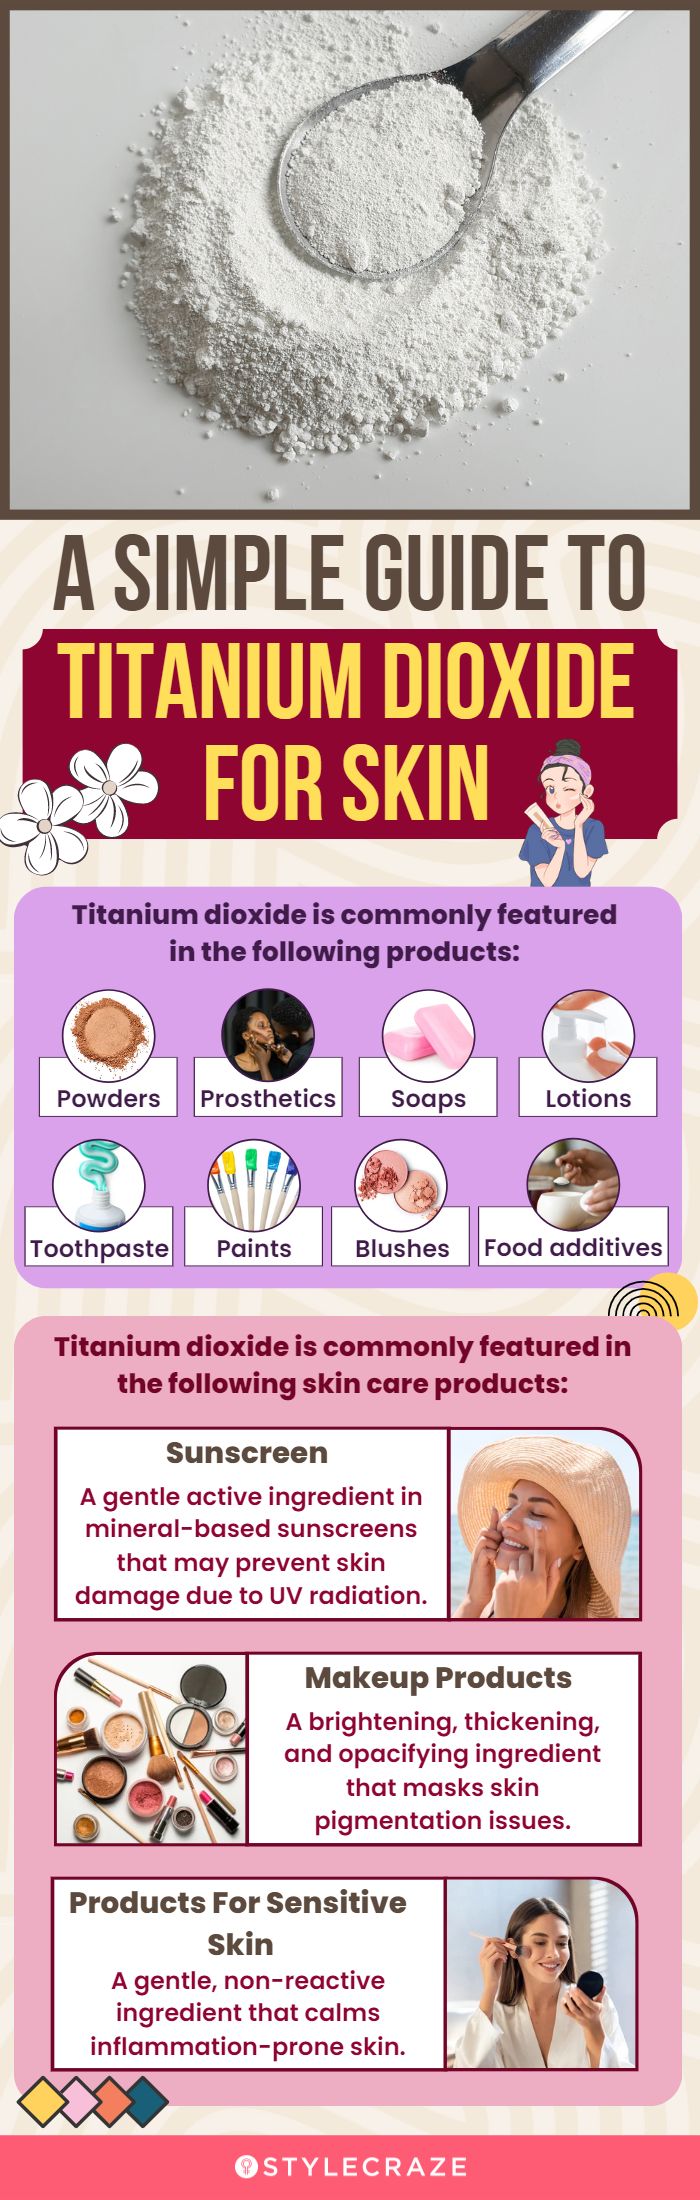 Titanium Dioxide For Skin: Benefits, Uses, And Safety